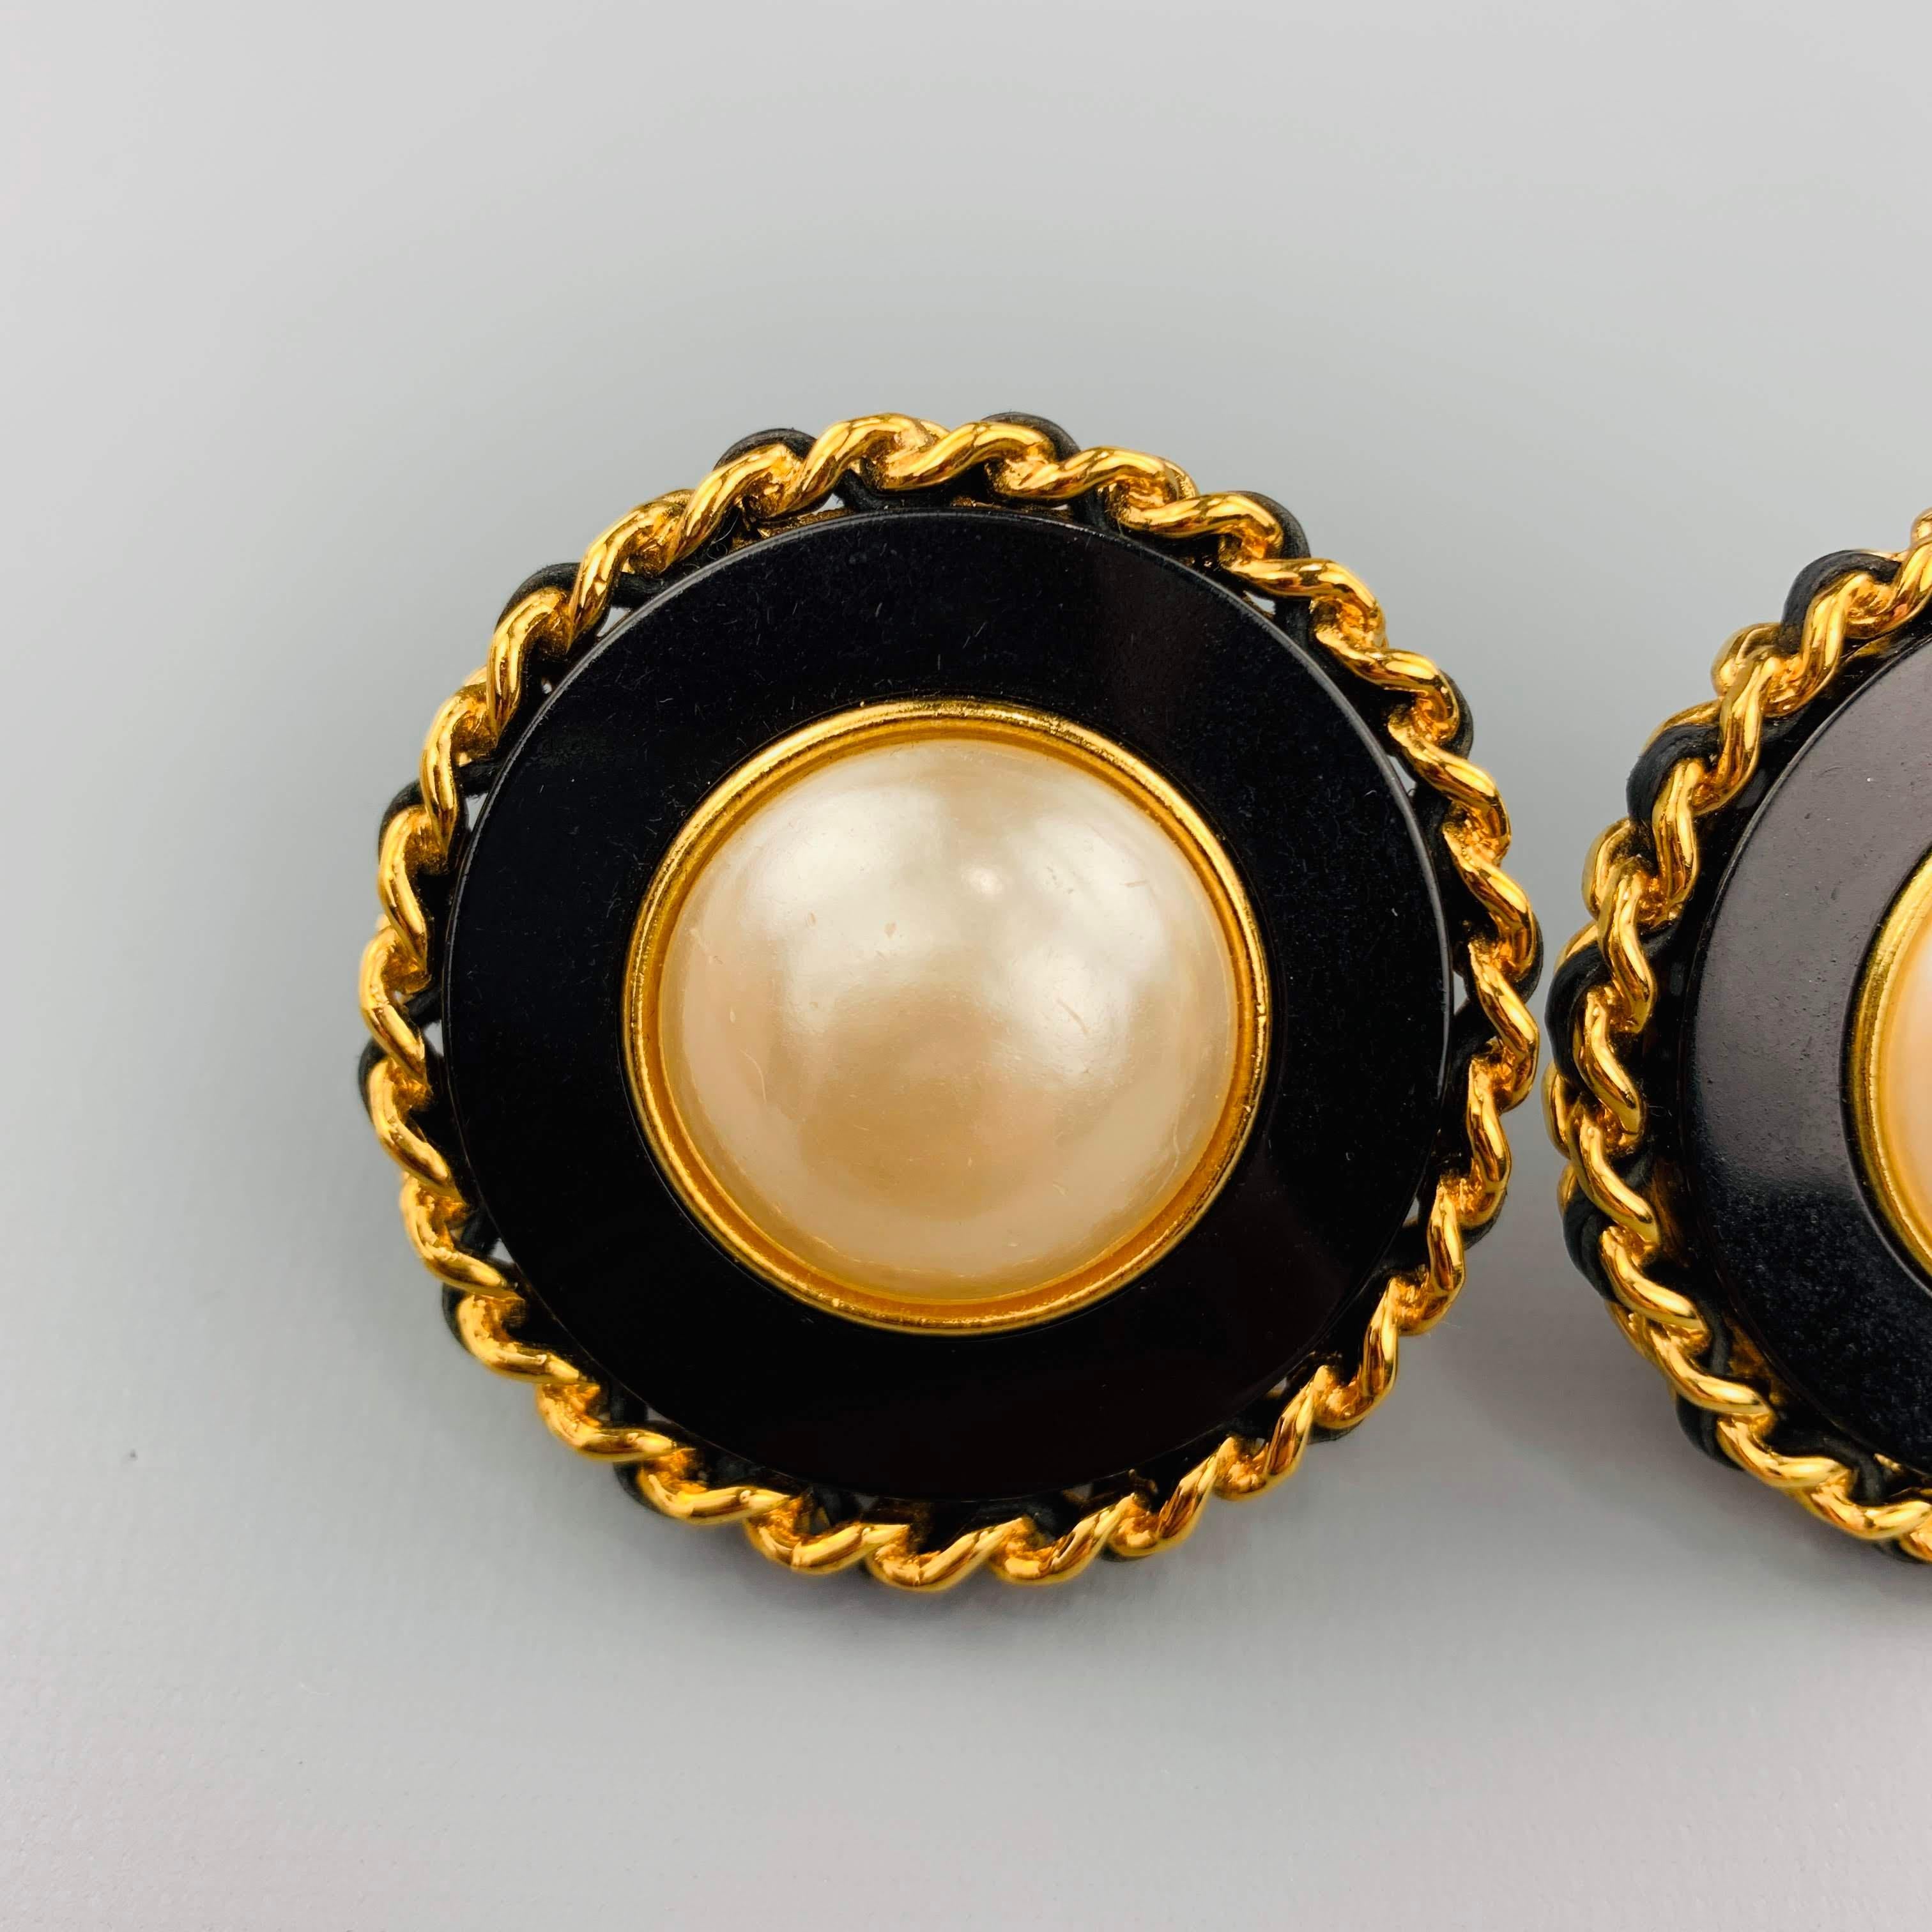 Vintage CHANEL (Circa 1986-1992) Season 28 clip on earrings feature a black enamel round base with a faux pearl center and yellow gold tone metal leather woven chain boarder. Made in France.
 
Very Good Pre-Owned Condition.
Marked: 28
 
5 cm.